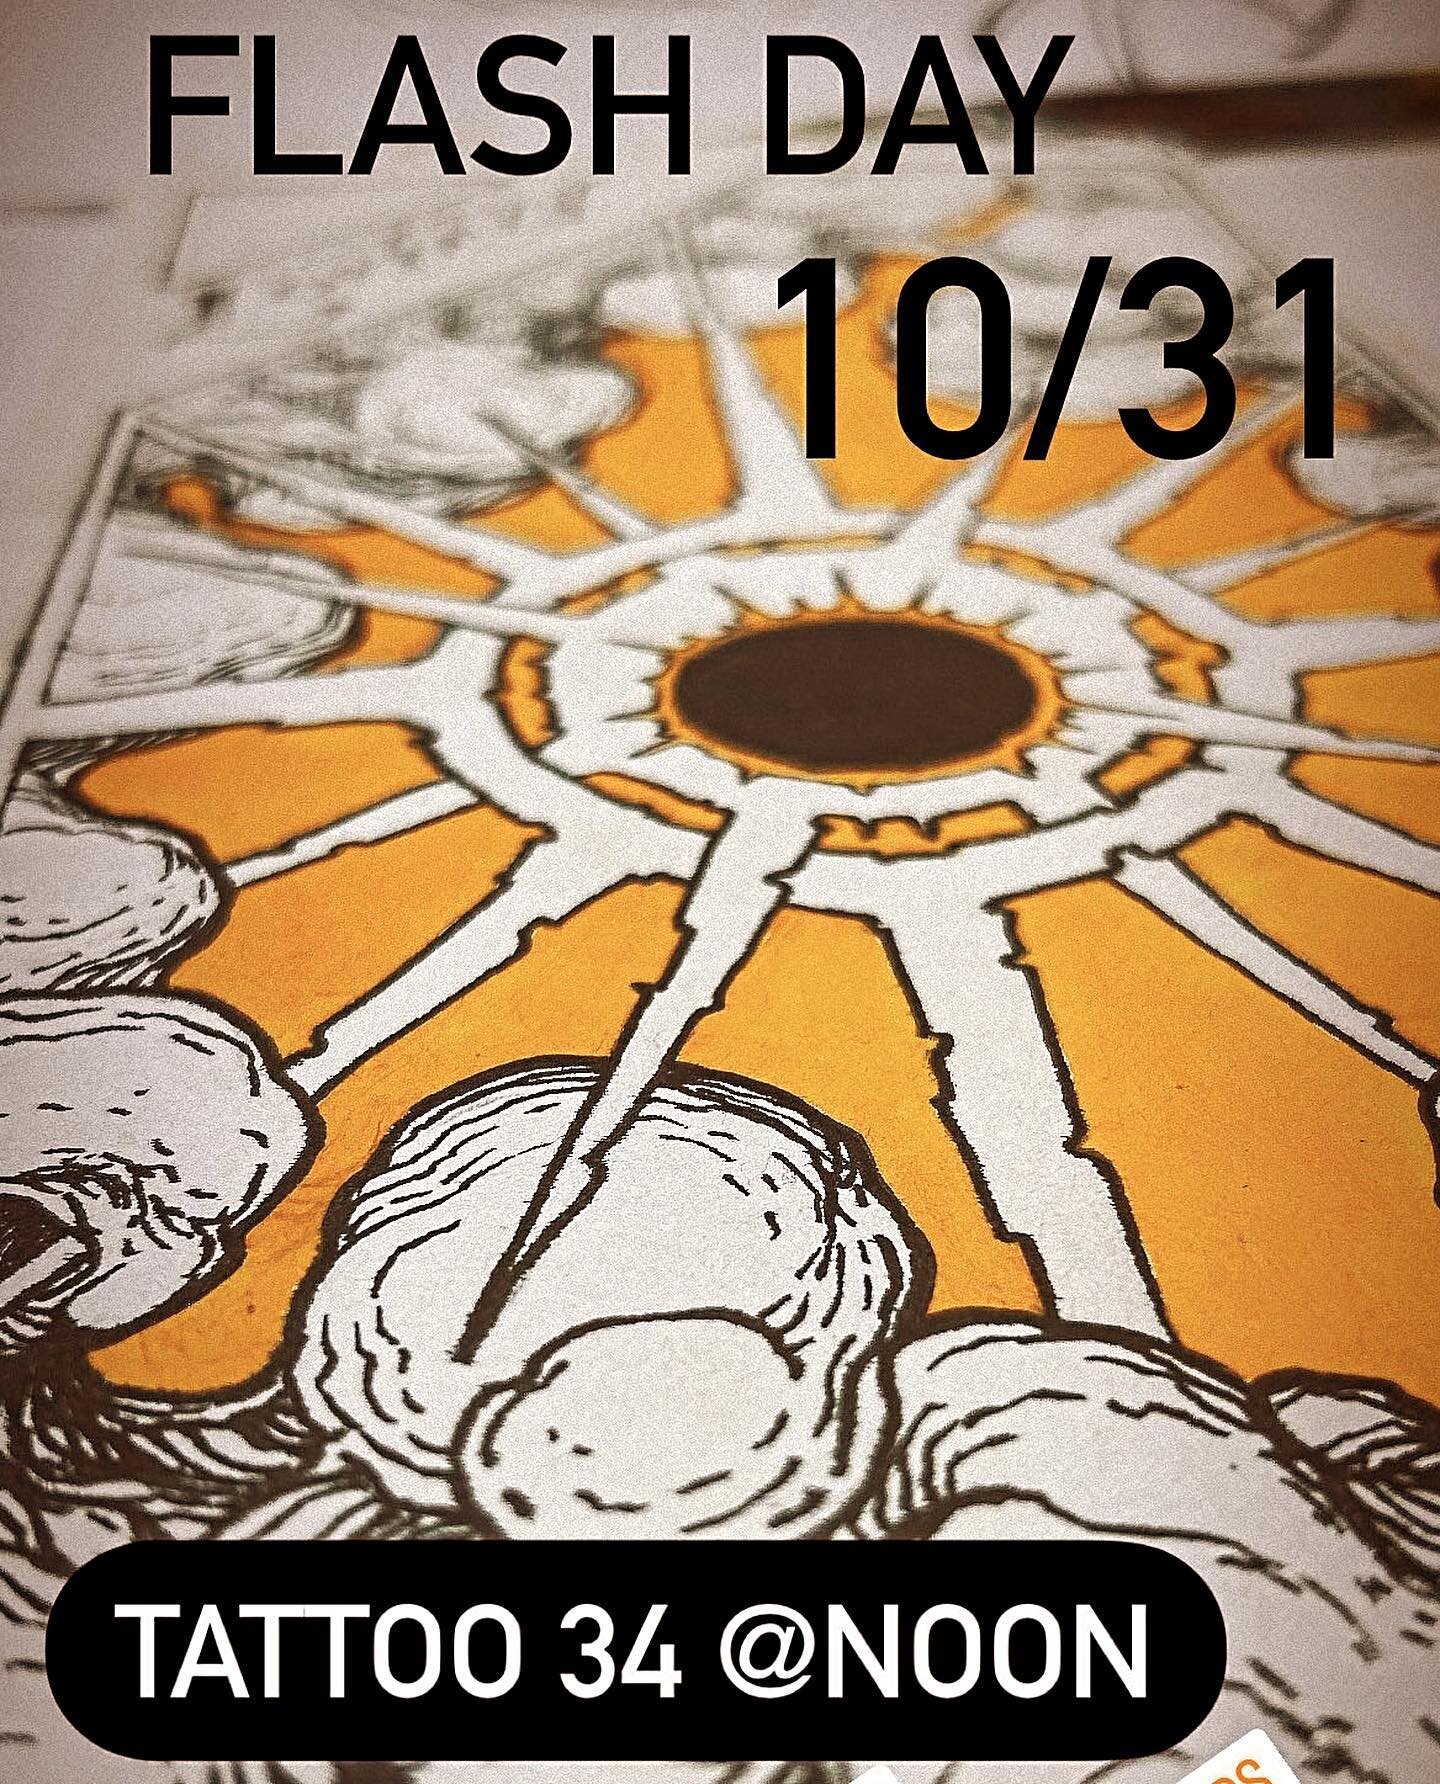 Halloween Flash Day! 10/31 at noon!

Participating Tattoo Artists Are:

Toby @tobylinwood (there for the beginning)
Micaeah @micaink_ 
Amelia @___grandmashands 
Hanam @ohanamibaba 
Jenny @campsongs (there for the end)

All the artists will be tattooi